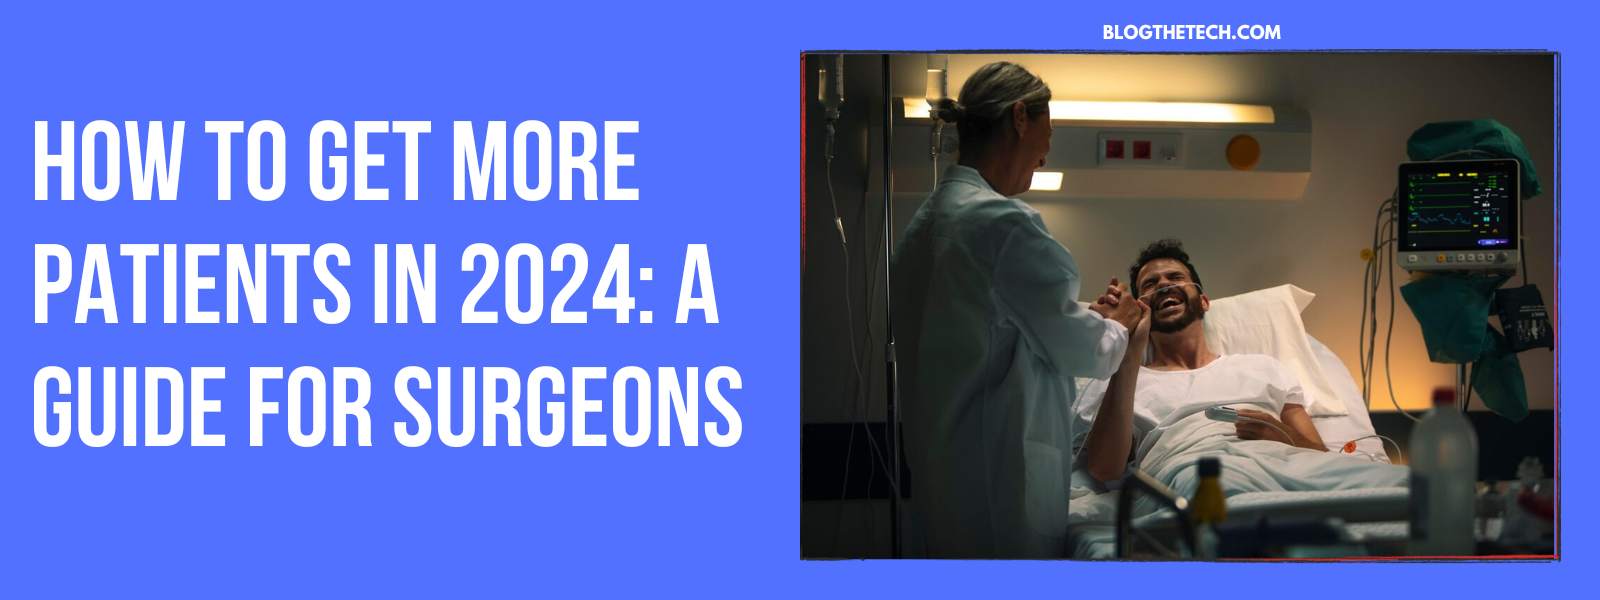 get-more-patients-in-2024-guide-for-surgeons